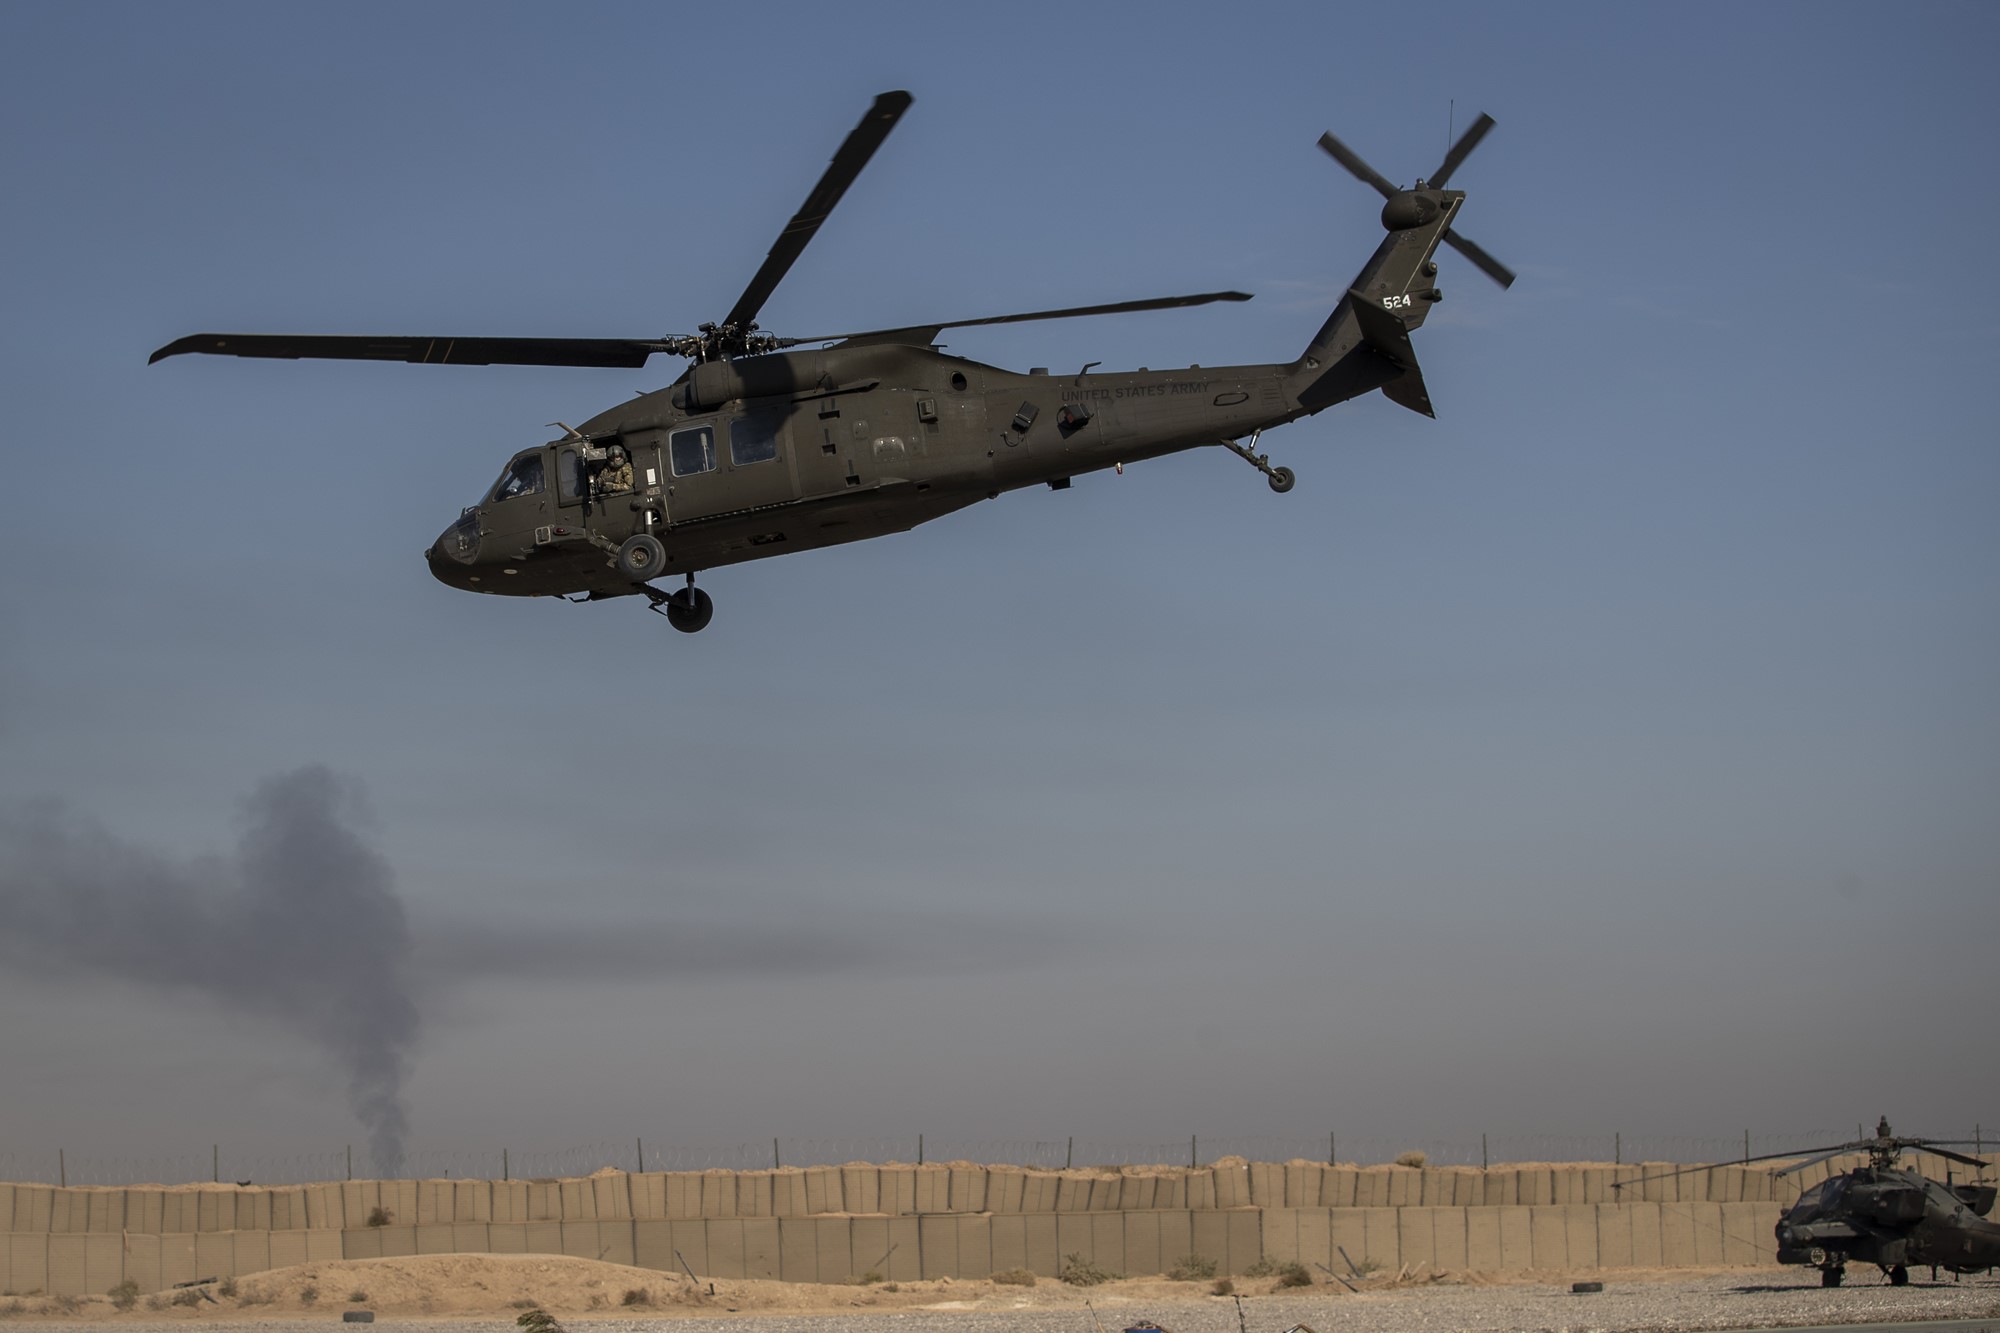 A helicopter takes off from a US military base.